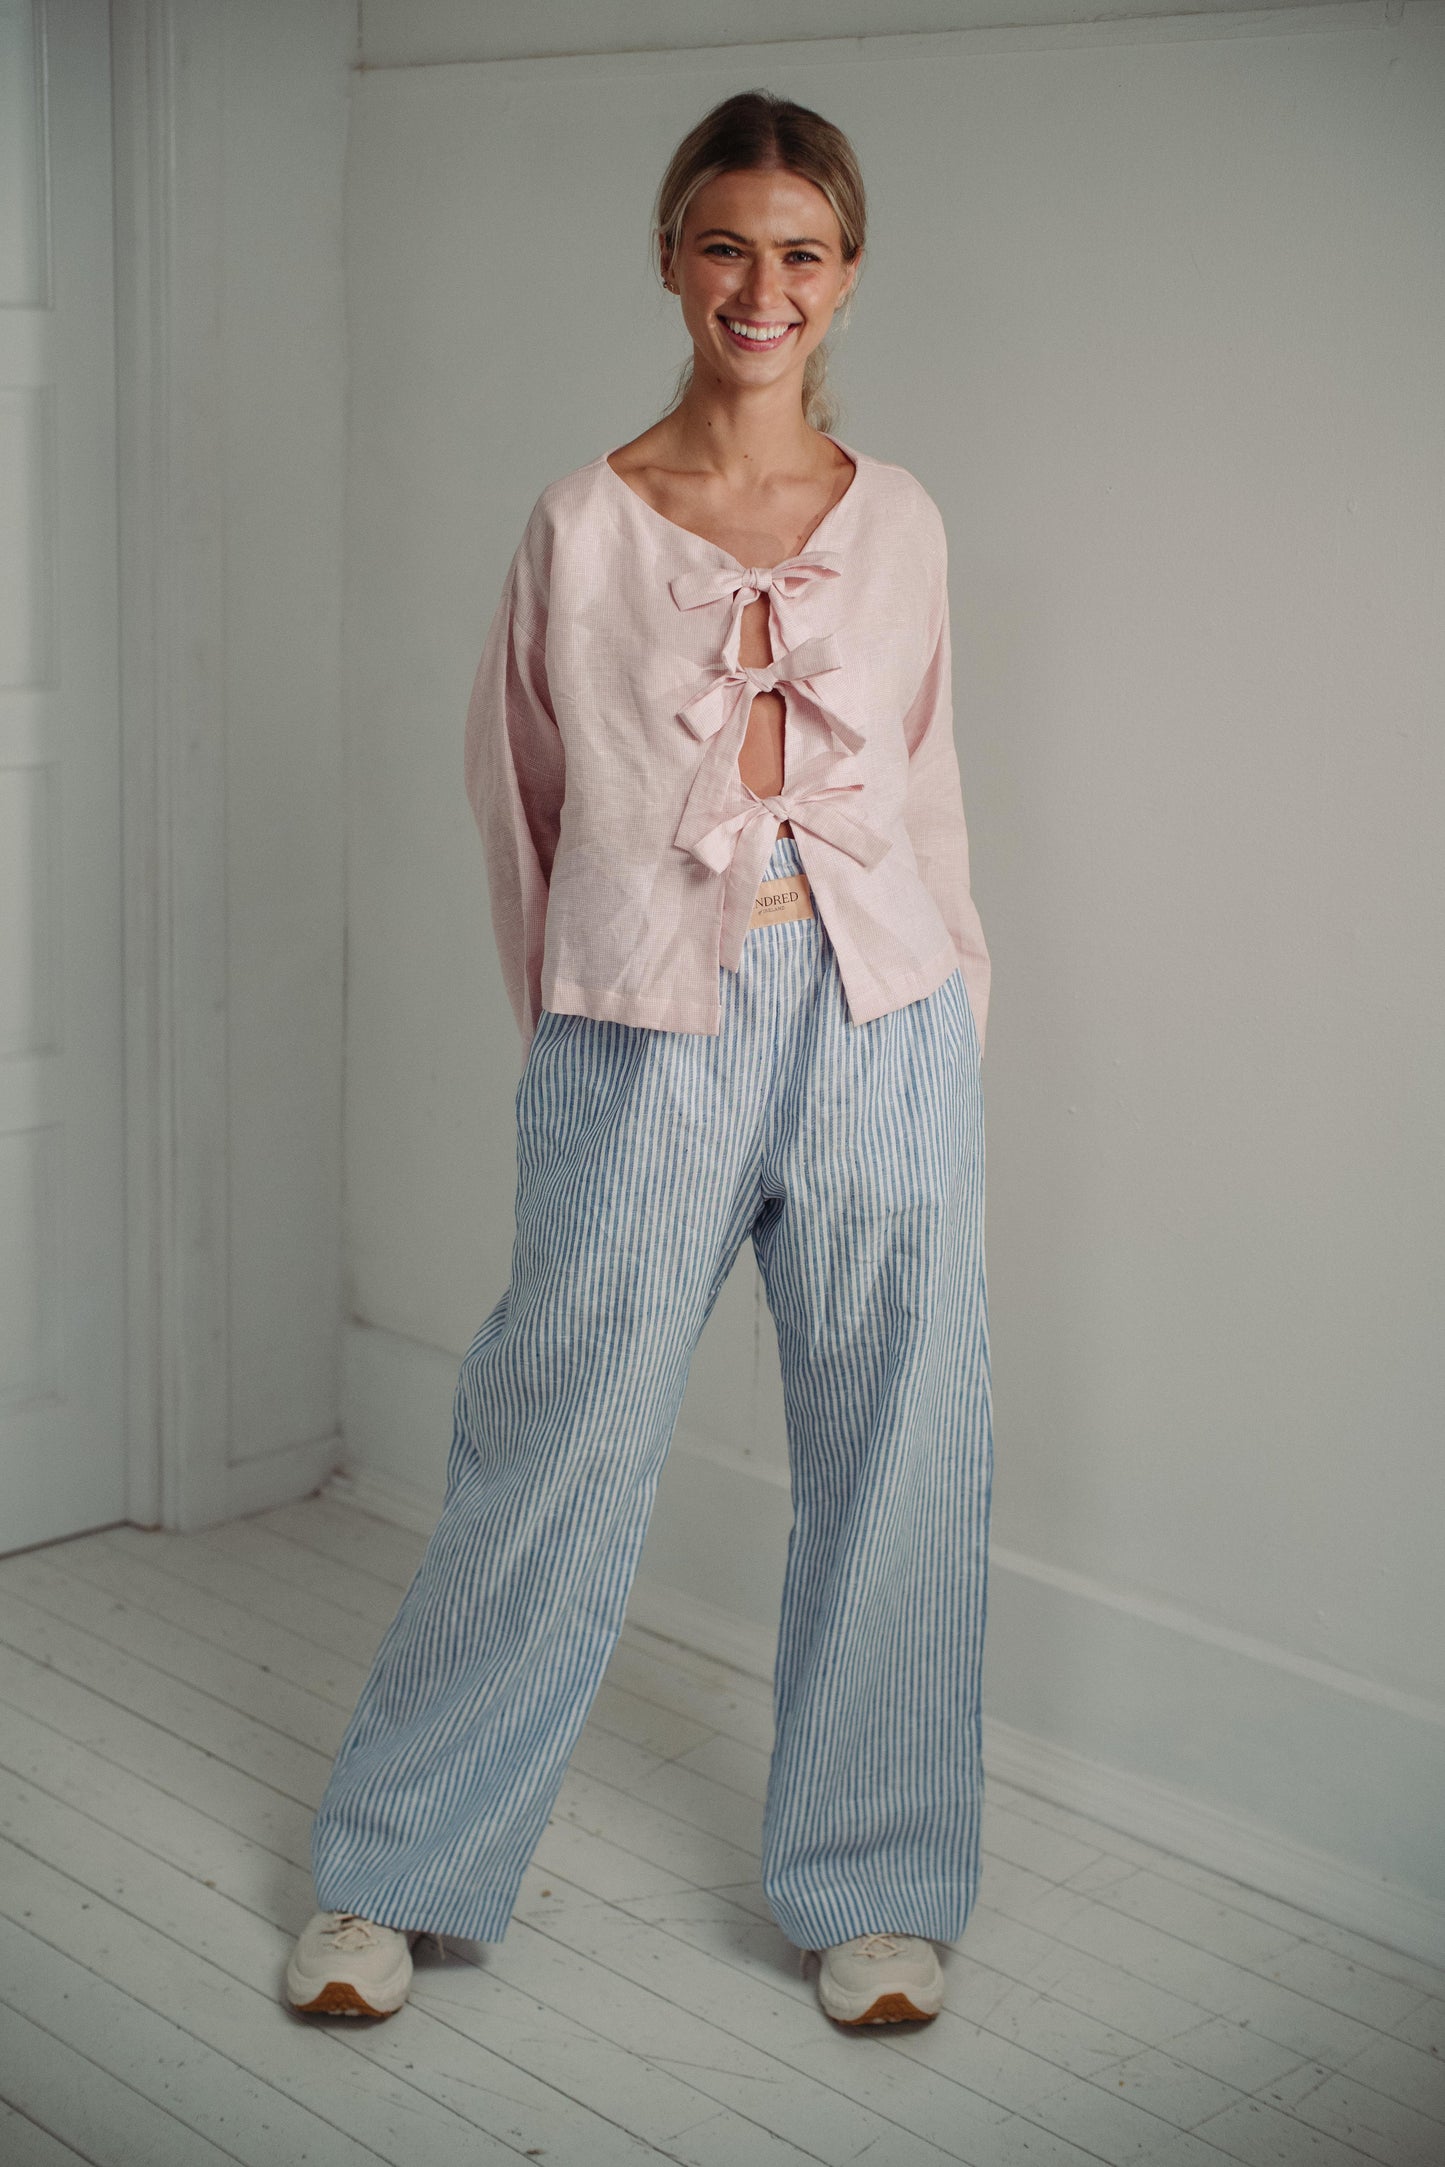 PINK TIE SHIRT | As part of our 'day-wear pyjamas' collection, the tie shirt is a new shape for us. Wear with bows to front or to the back, this top feels effortless and easy to wear, yet makes a little bit of a statement. Created with a soft pink/white c